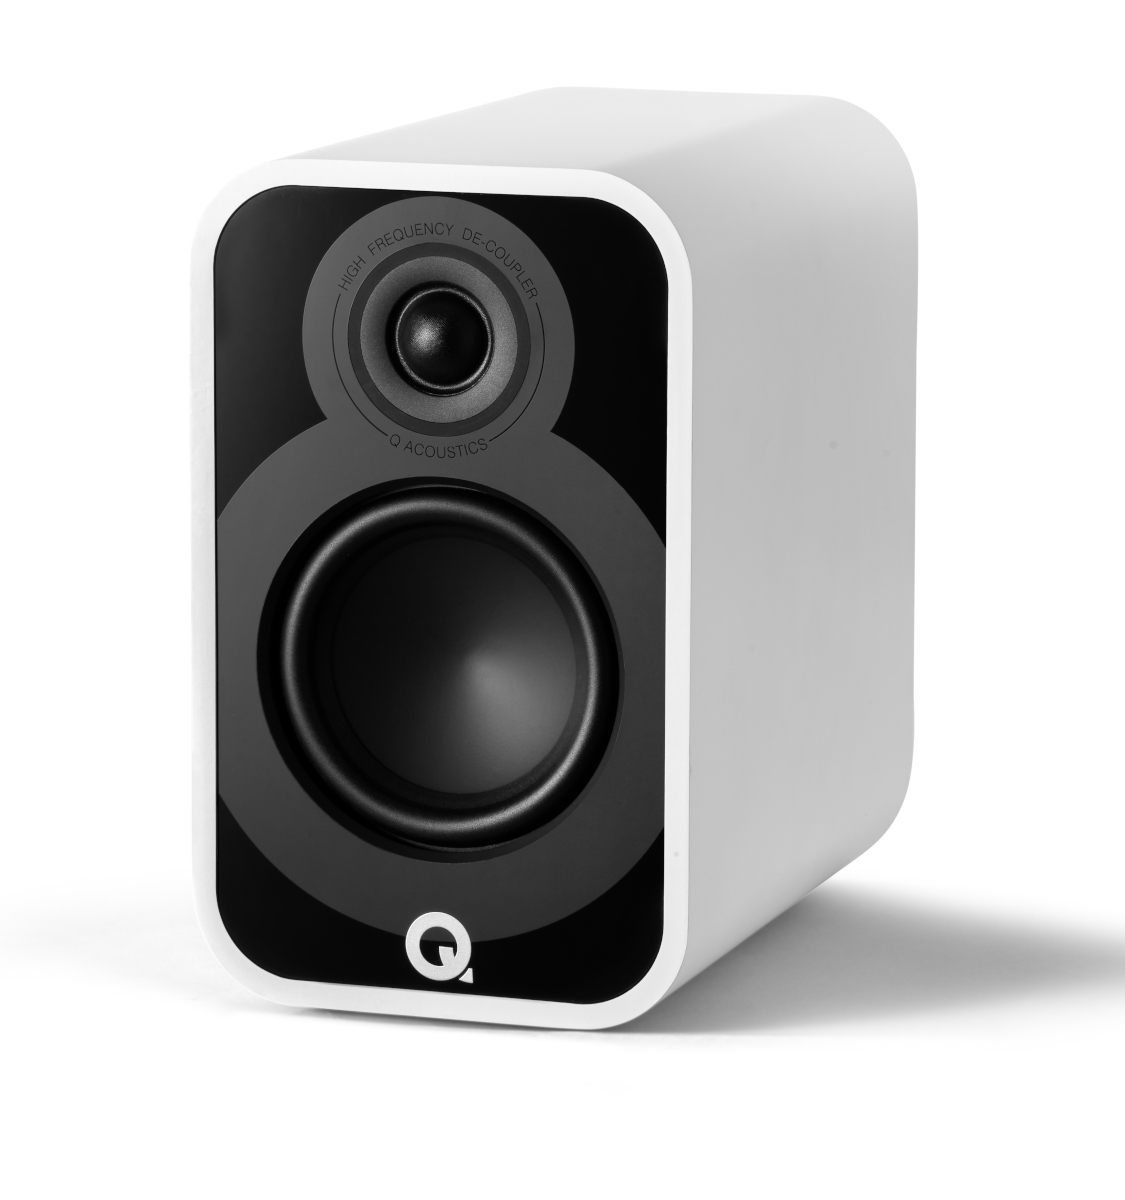 Q Acoustics 5020 Bookshelf Speakers Pair Satin White 5" Mid Bass Driver, 1" Tweeter Stereo System for Home Theater Entertainment Center, Surround - 1